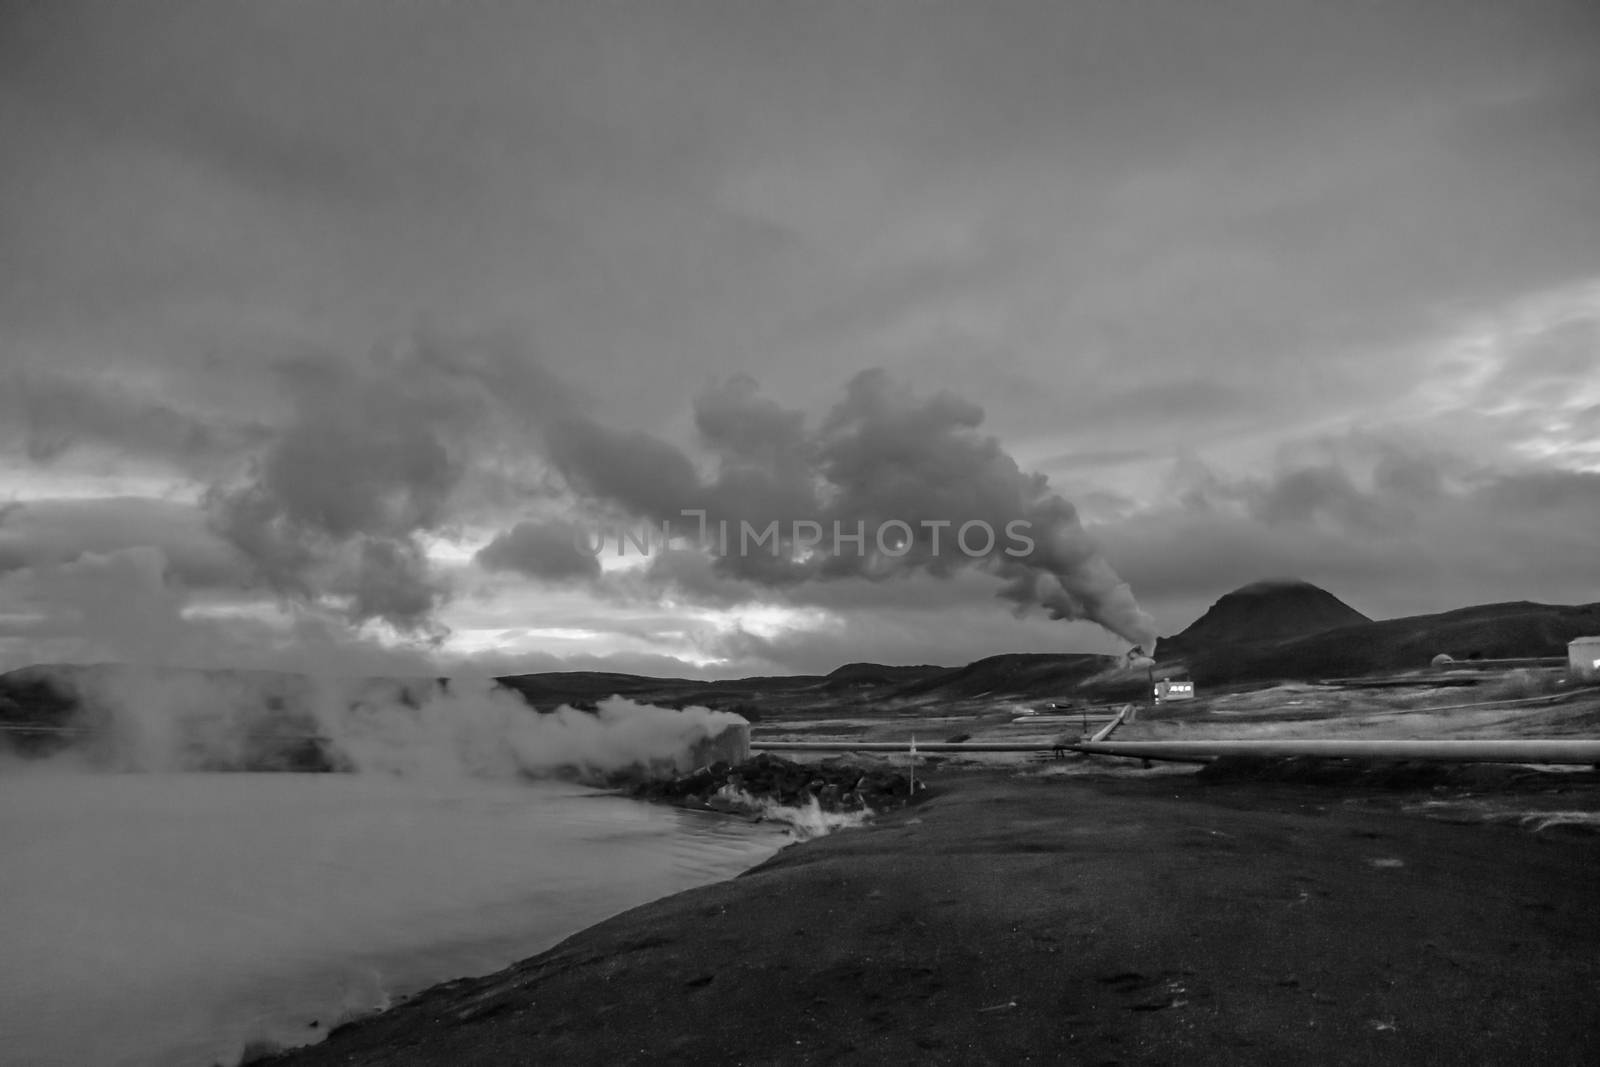 Blue Lake in Iceland geothermal hot spring turquoise water steam pipelines in black and white